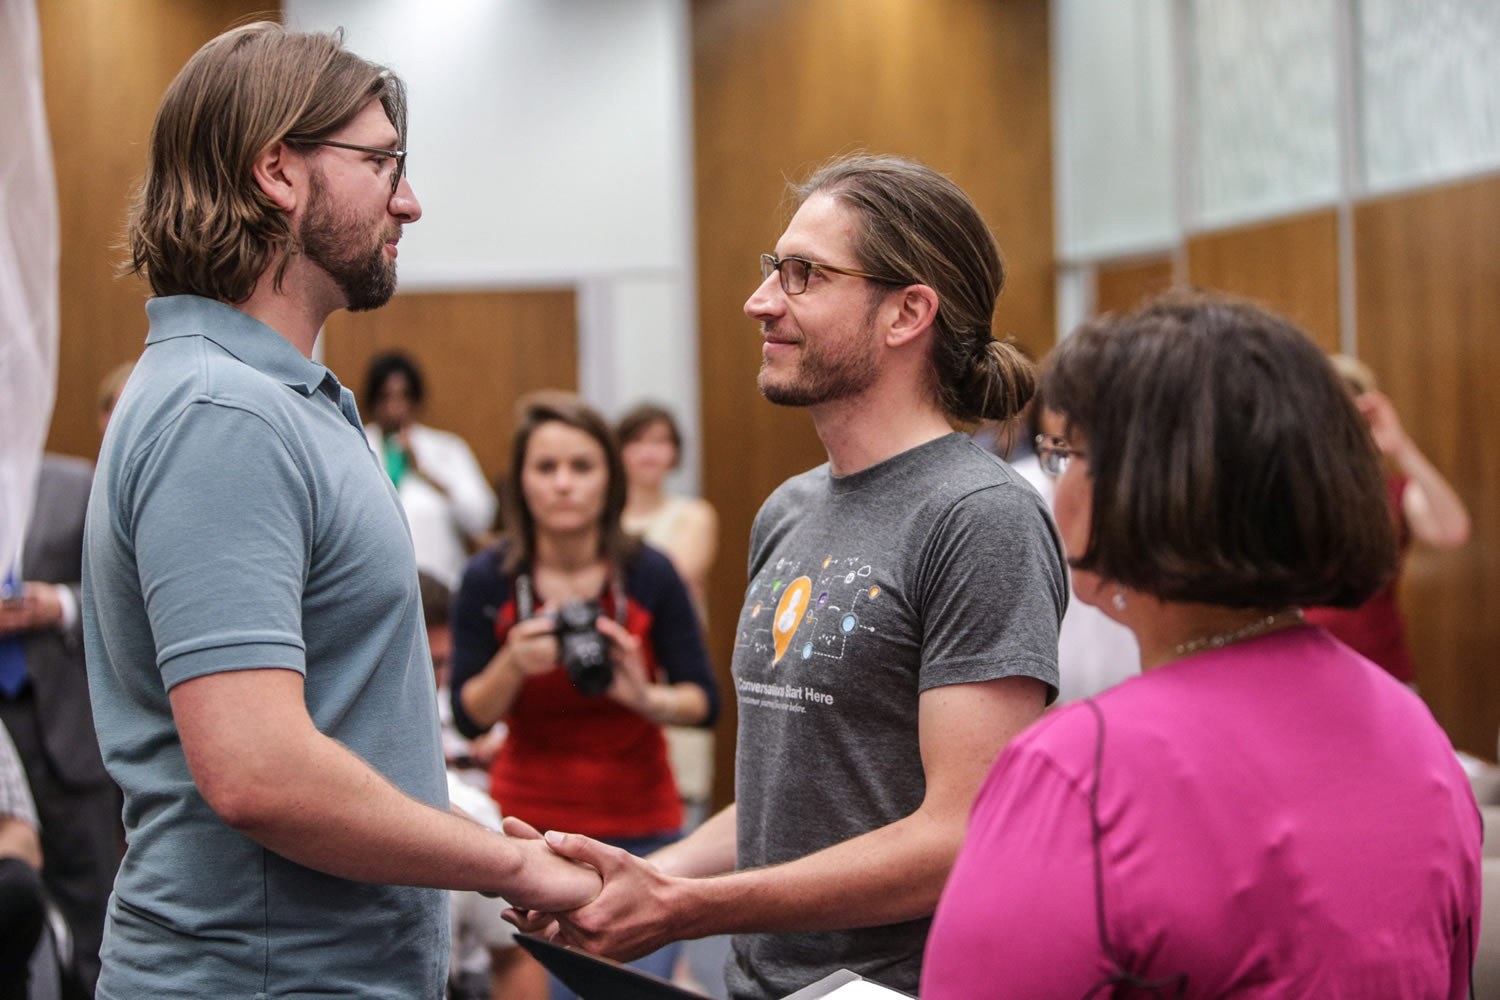 Craig Bowen, 35, left, and Jake Miller, 30, are married by Marion County Clerk Beth White, right, in Indianapolis on Wednesday.